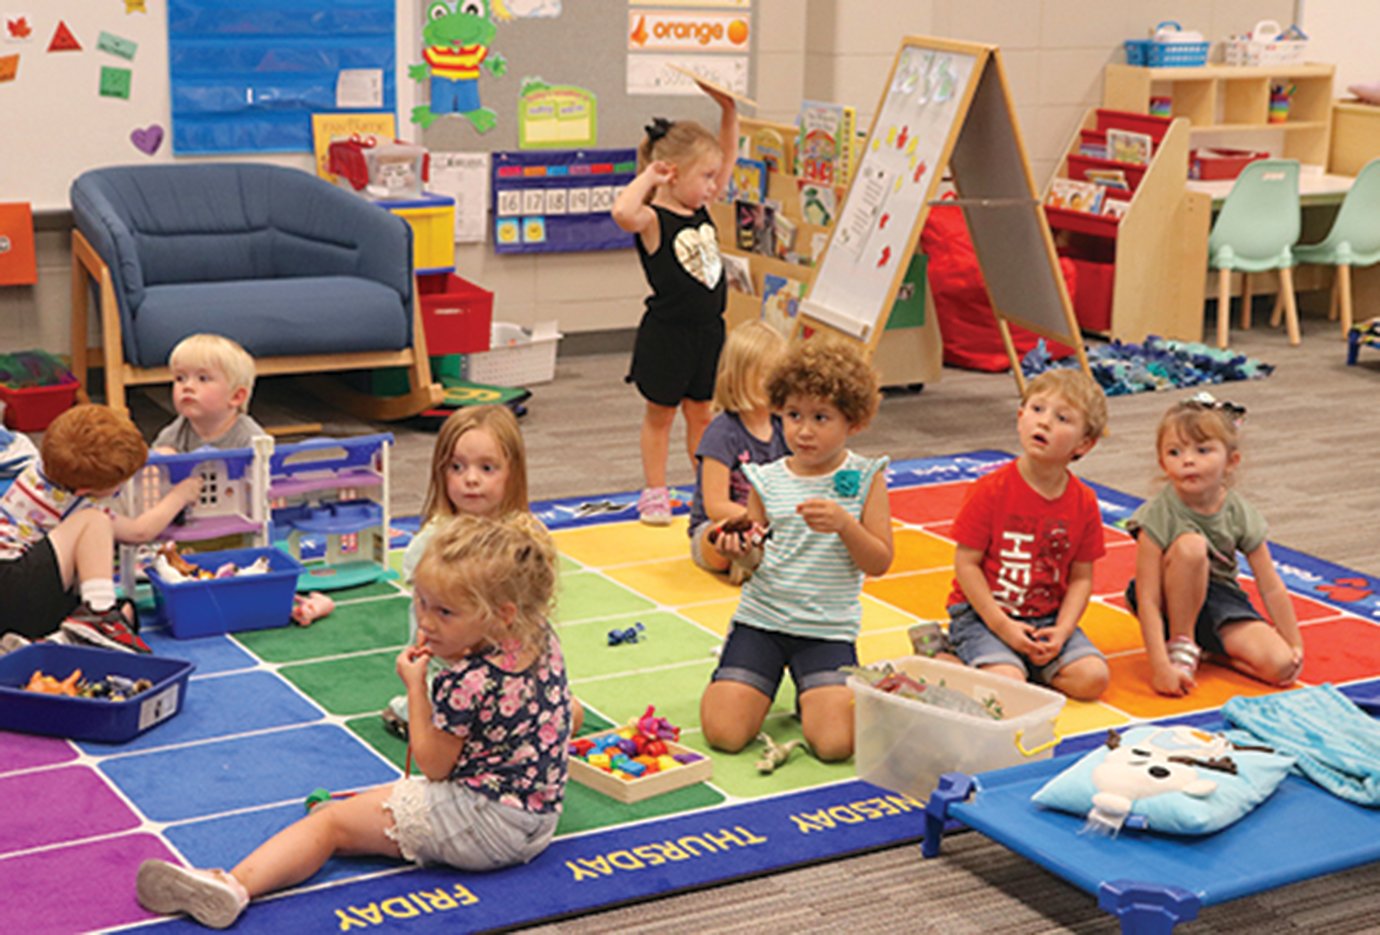 North Montgomery's Early Learning Academy will get a boost via a $270,000 Build, Learn, Grow Stabilization Grant to expand its preschool program.